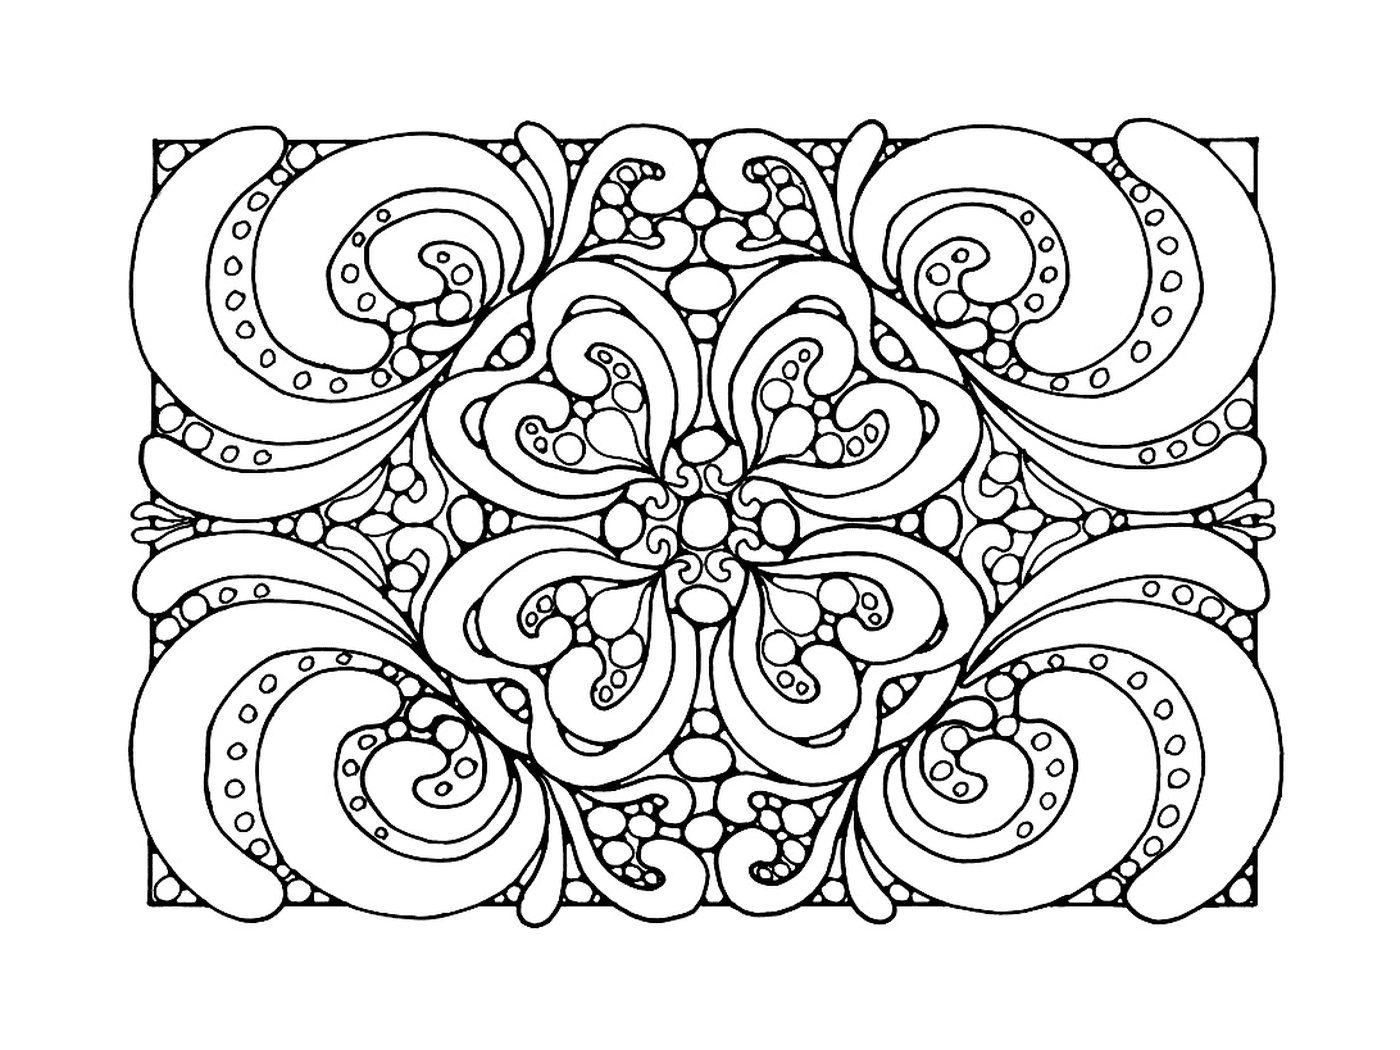  an abstract pattern with a floral pattern 